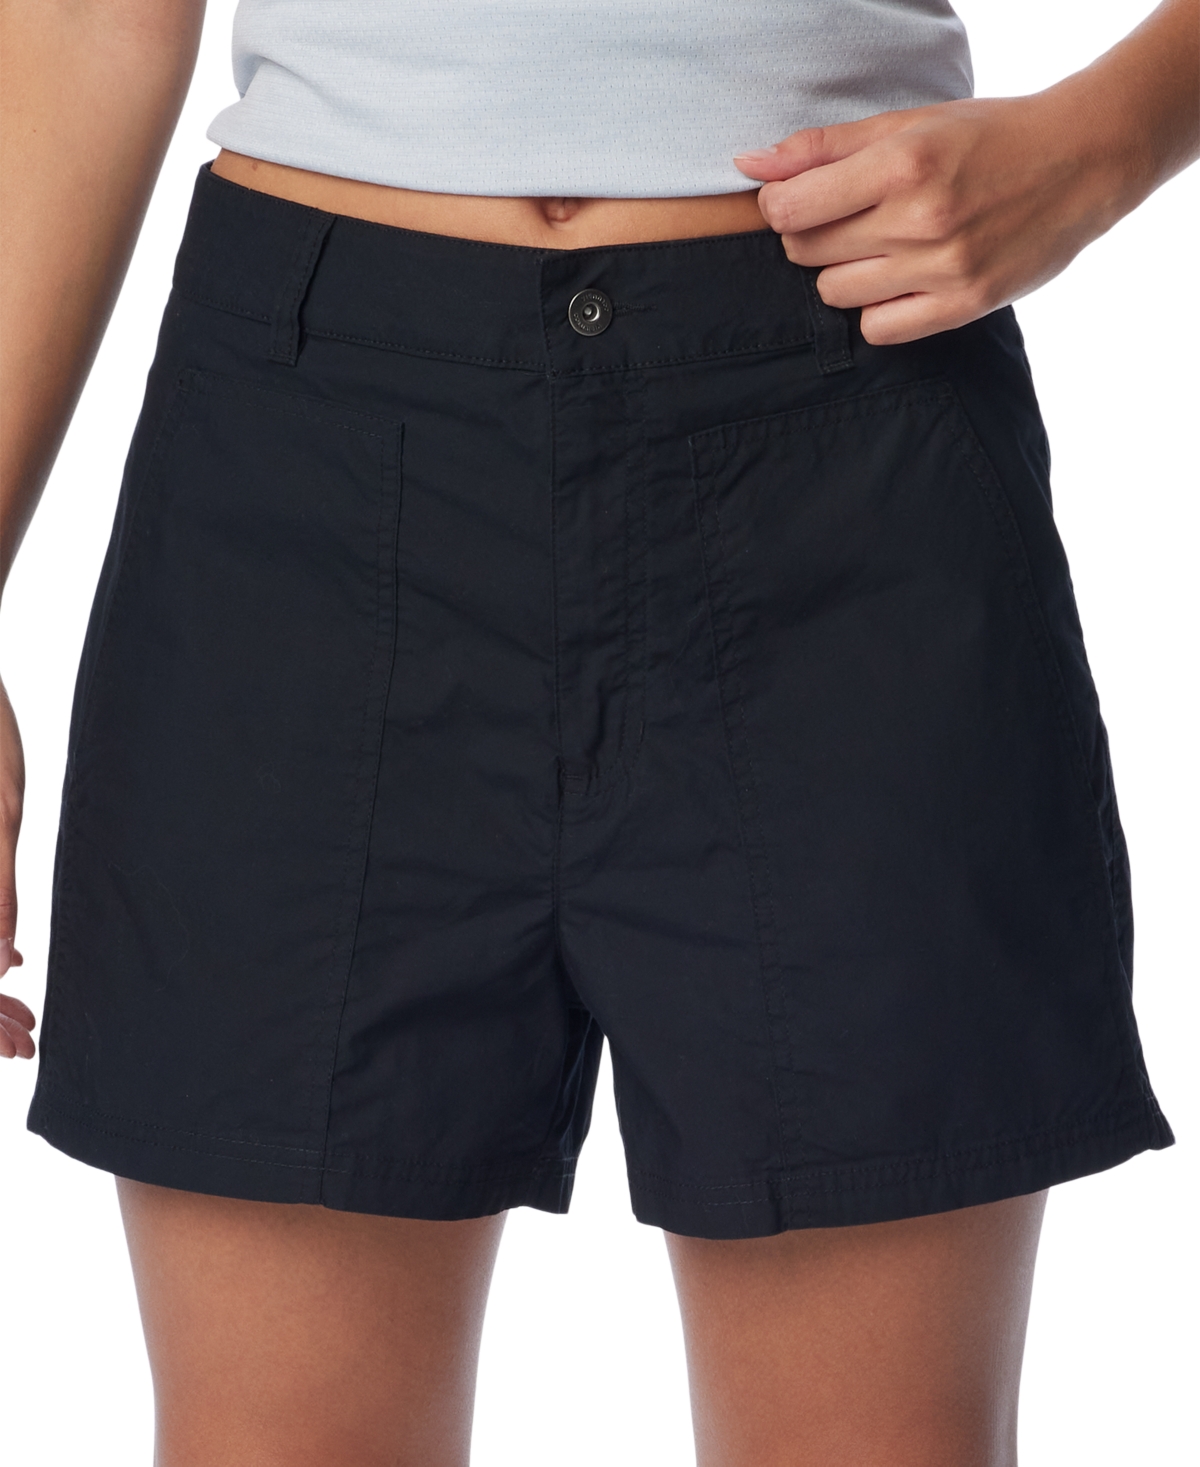 Women's Holly Hideaway Washed Out Shorts - Black